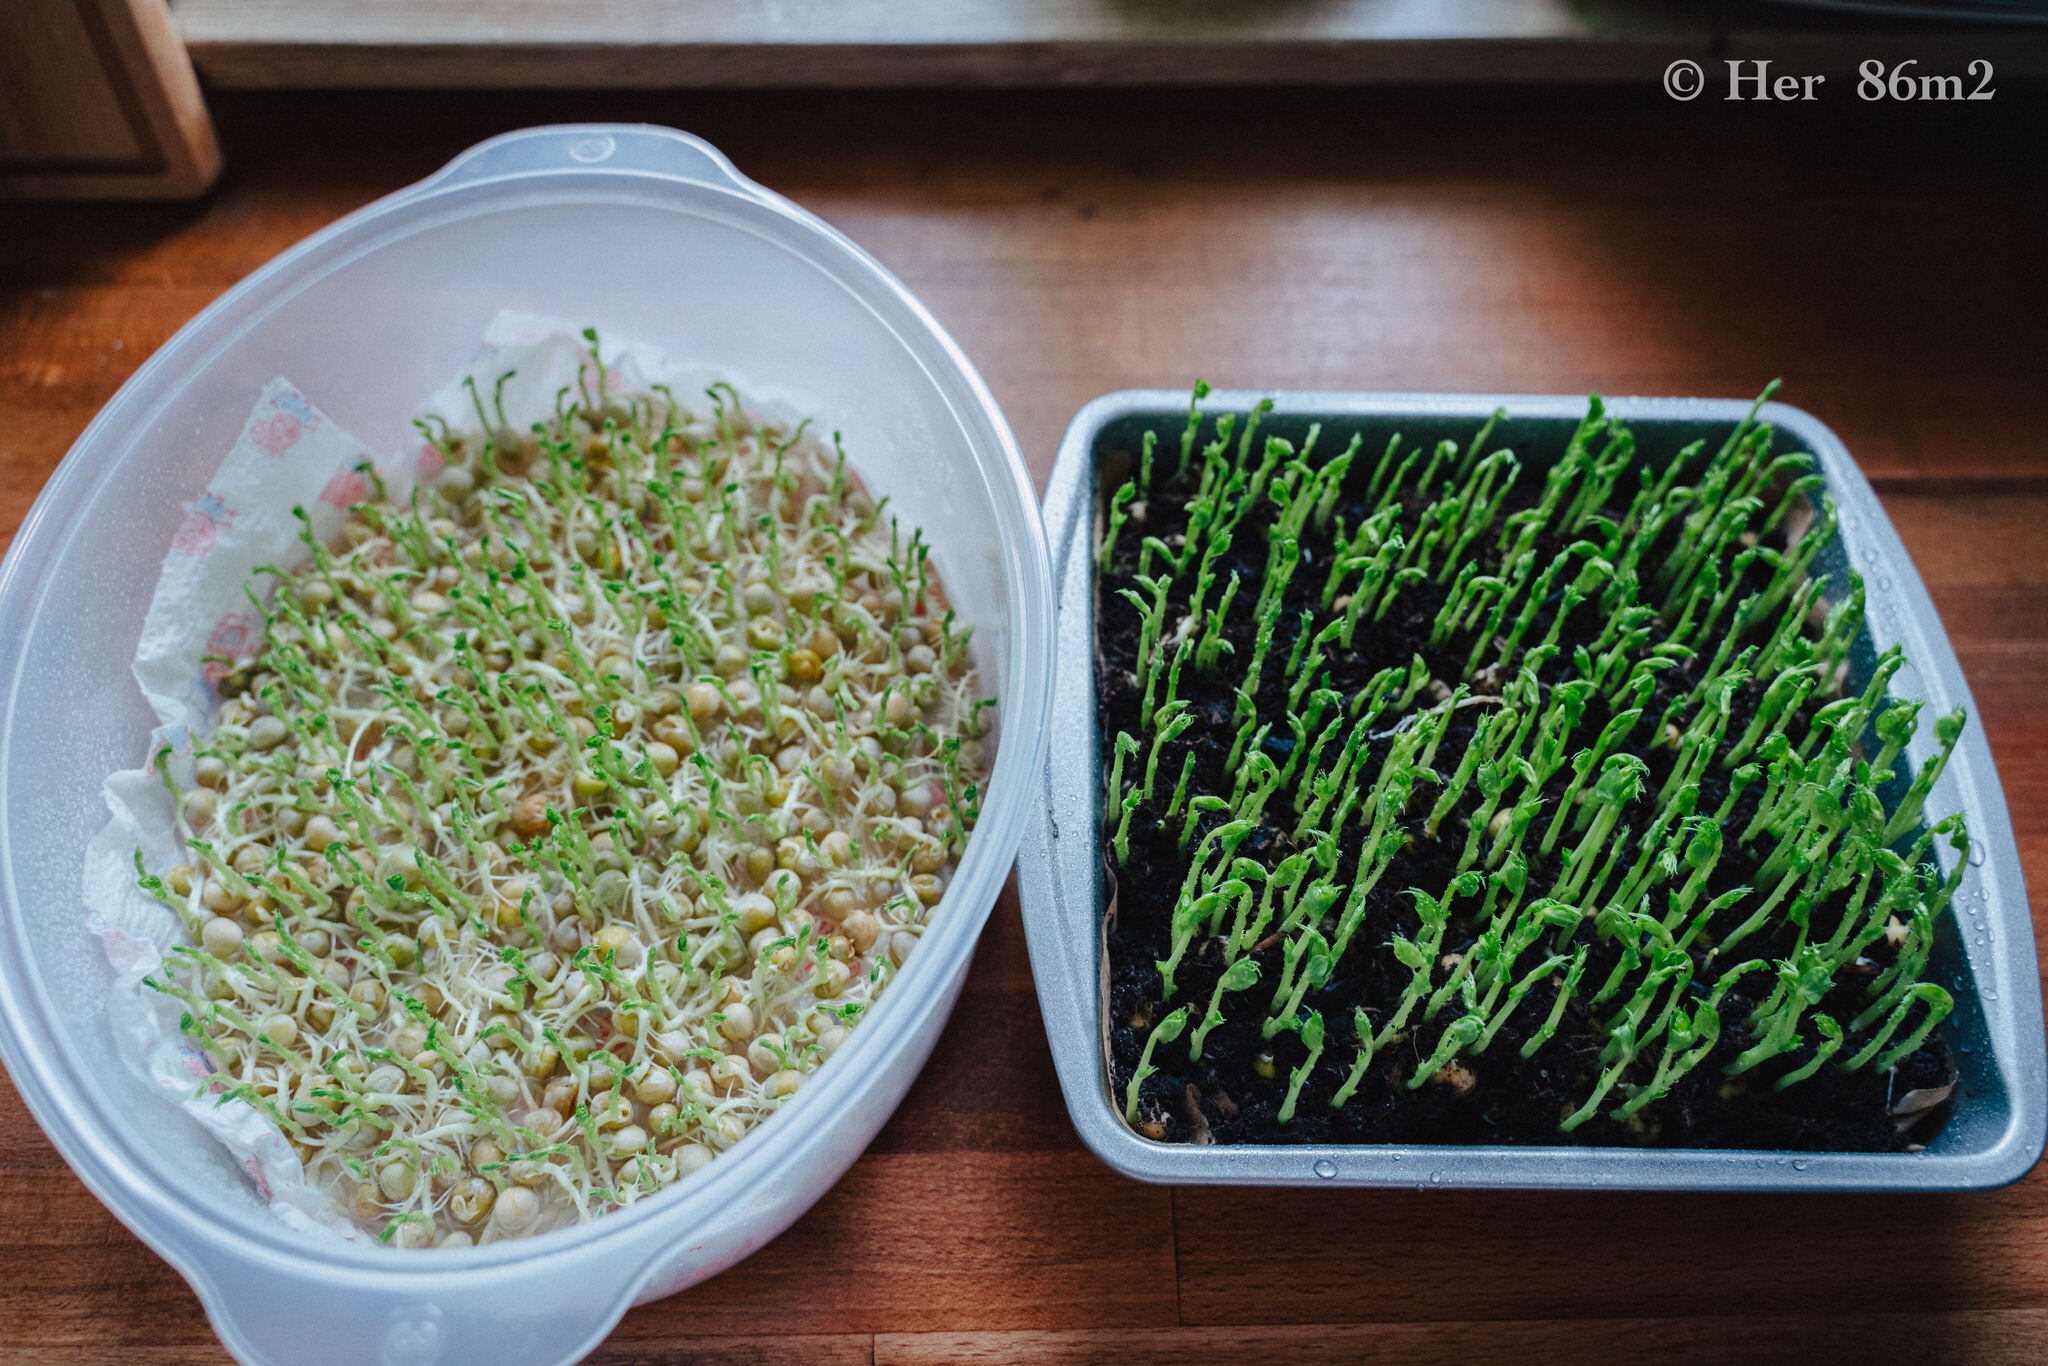 Grow Vegetables Indoors - Microgreens & Sprouts - From Seed to Harvest 55.JPG